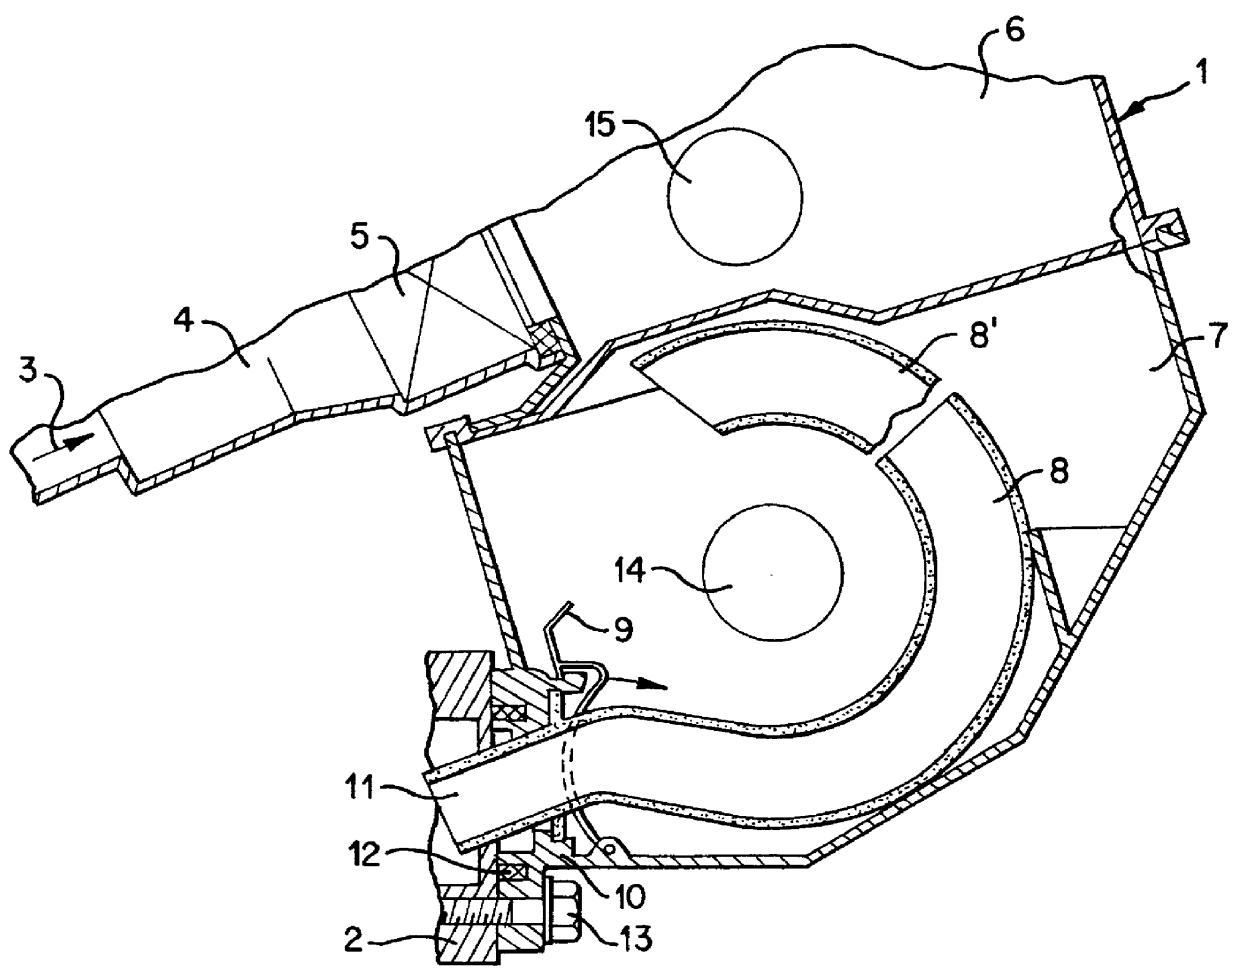 Air intake module for an internal combustion engine